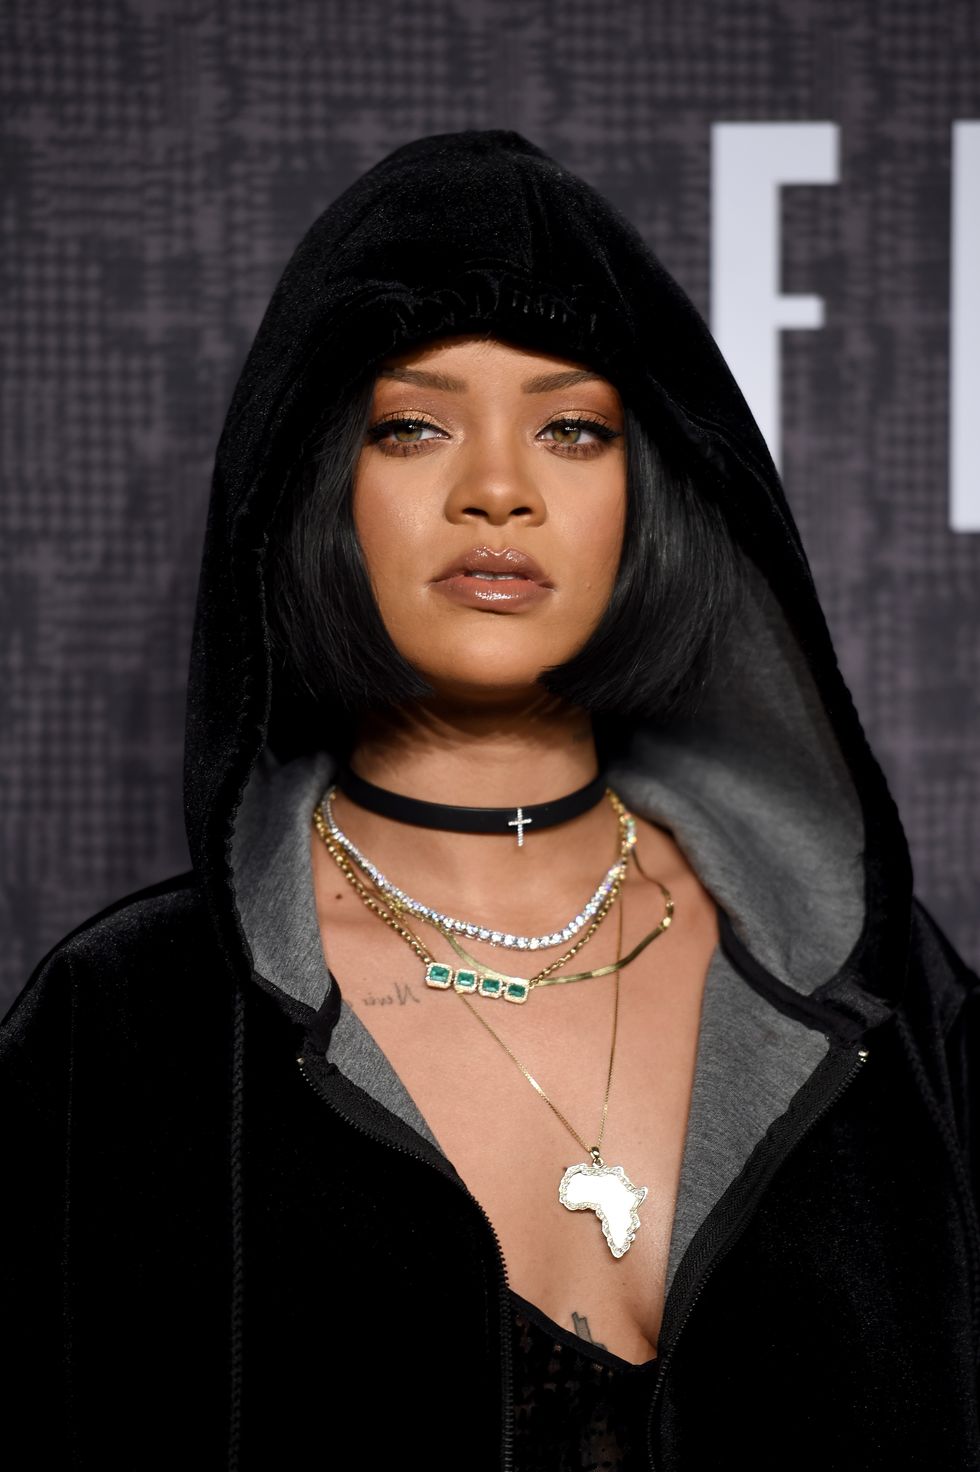 new york, ny february 12 rihanna attends the fenty puma by rihanna aw16 collection during fall 2016 new york fashion week at 23 wall street on february 12, 2016 in new york city photo by dimitrios kambourisgetty images for fenty puma